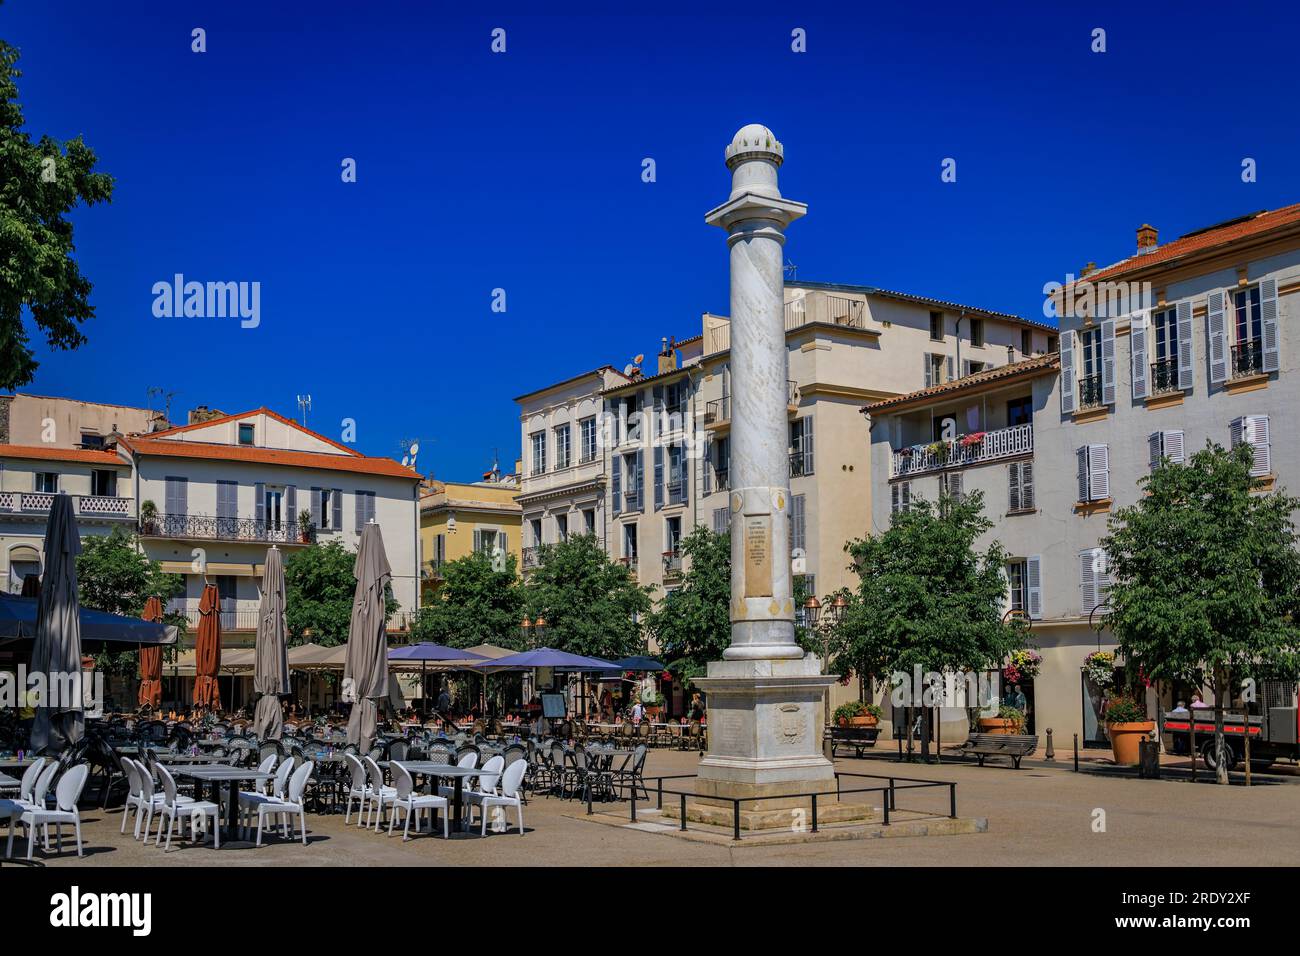 Marble column gifted to Antibes by Louis XVIII in 19th century on Place Nationale square near the provencal market in old town, South of France Stock Photo